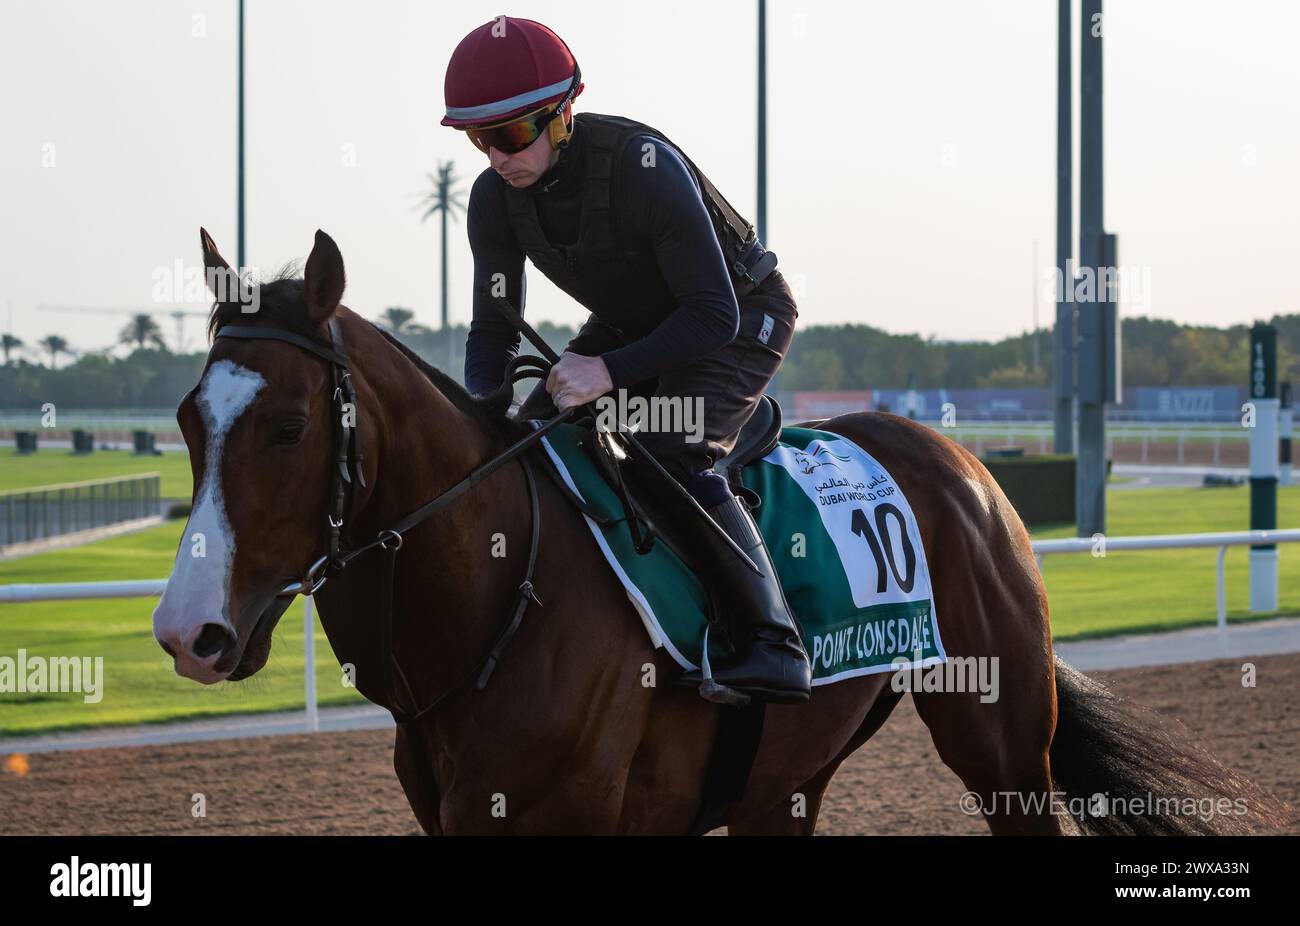 Meydan Racecourse, Dubai, UAE, Friday 29th March 2024; Sheema Classic contender Point Lonsdale and their rider take part in trackwork at Meydan Racecourse, ahead of the Dubai World Cup meeting on Saturday 30th March 2024. Credit JTW Equine Images / Alamy Live News Stock Photo